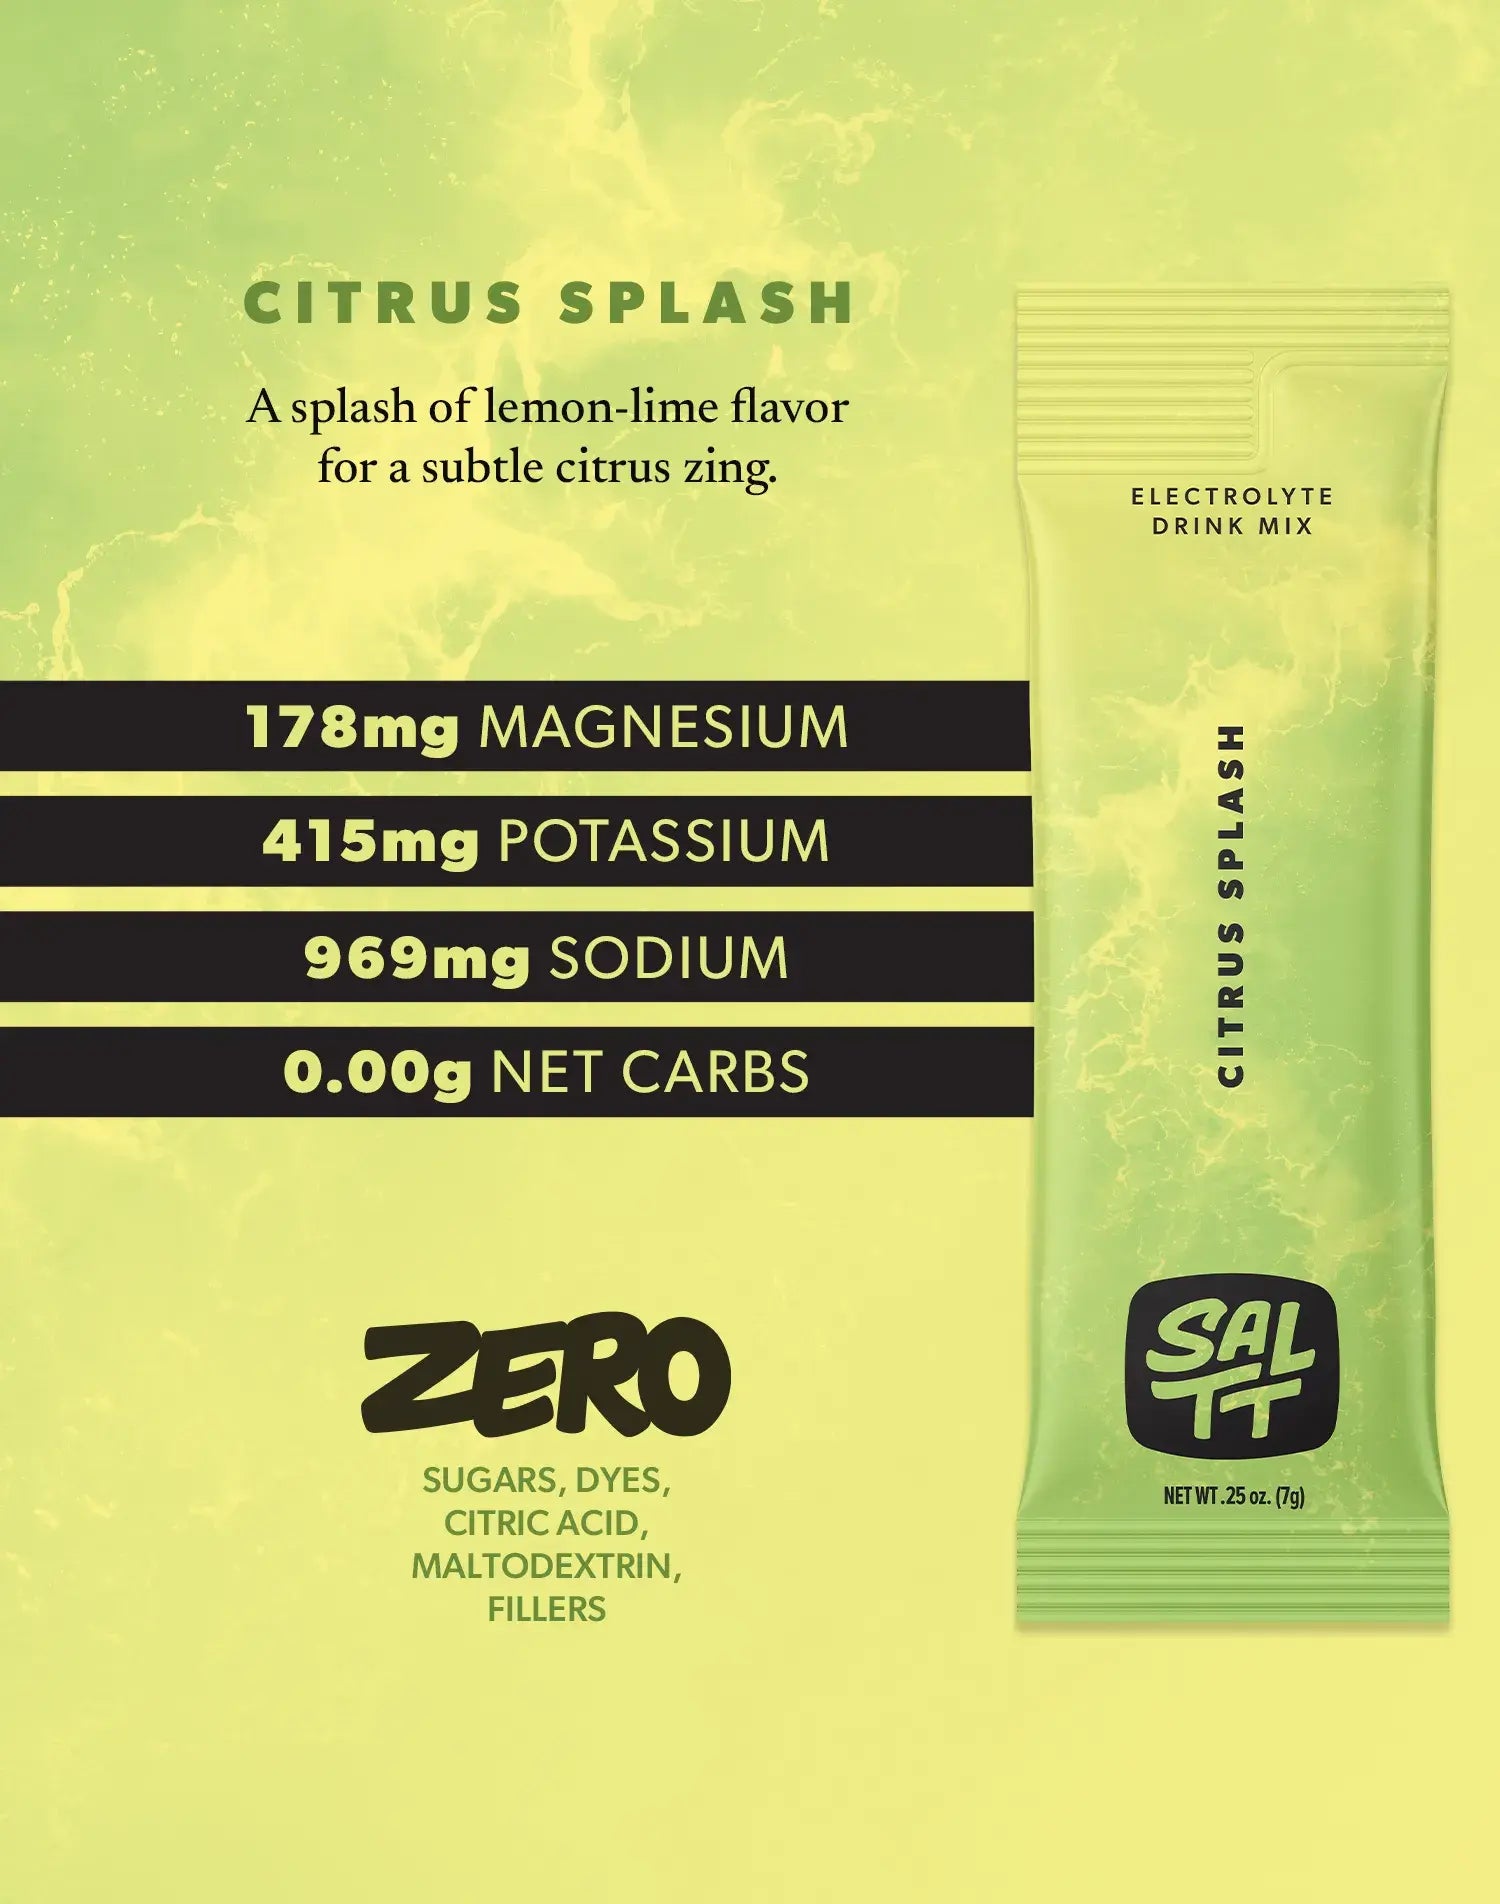 Nutrition for Citrus Splash flavor. Citrus Splash has 178mg Magnesium, 415mg Potassium, 969mg Sodium, 0.00g net carbs. Zero sugars, dyes, citric acid, maltodextrin, or fillers. See nutrition dropdown for complete supplement facts.